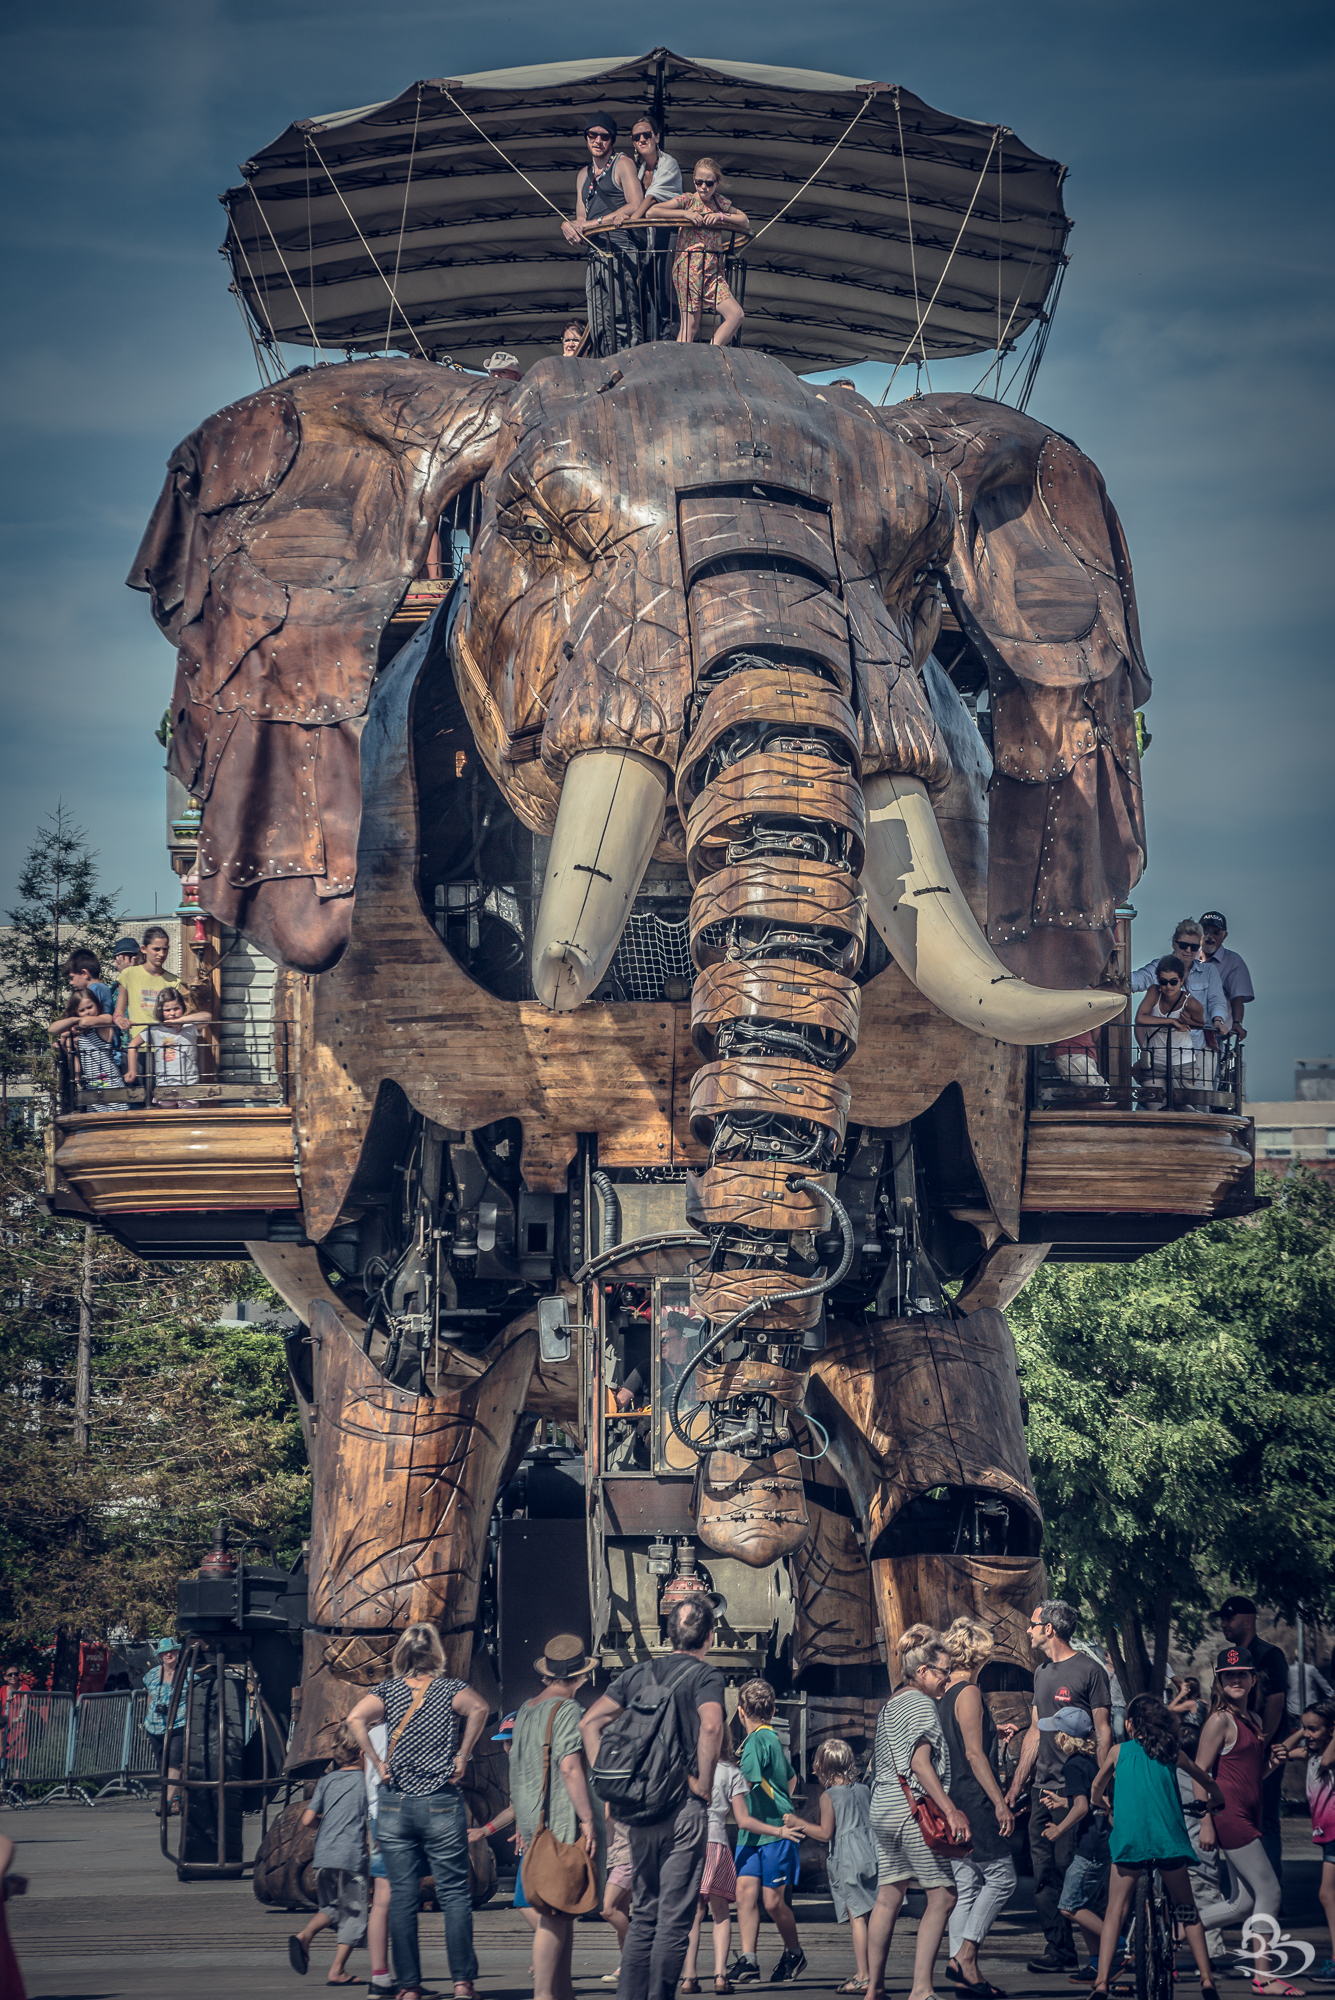 The Great Elephant on the Isle of Nantes. Artist Android Jones and partner Martha Gilbert are standing on the very top! (Photo by Gilles Bonugli Kali)